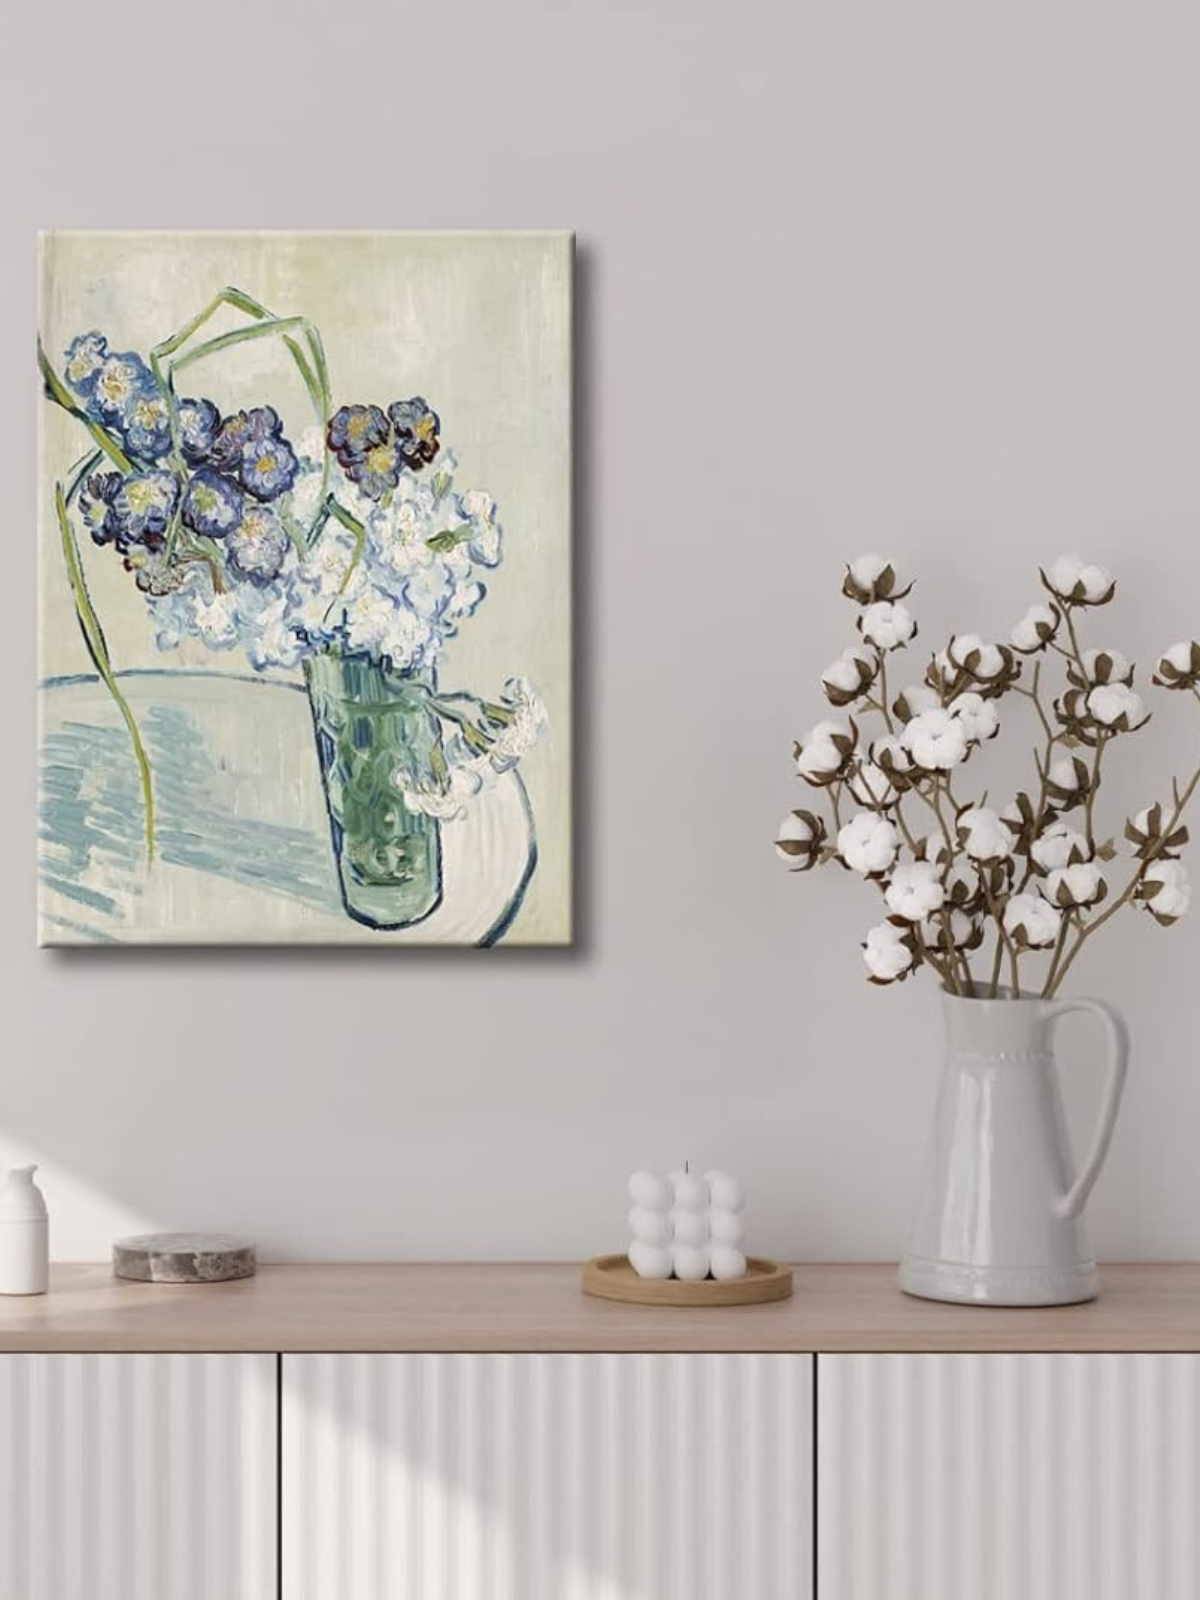 Art Glass with Carnations Canvas Prints Wall Art of Van Gogh Famous Floral Oil Paintings Reproduction Classic Flowers Pictures Artwork on for Home Office Decorations Wall Decor